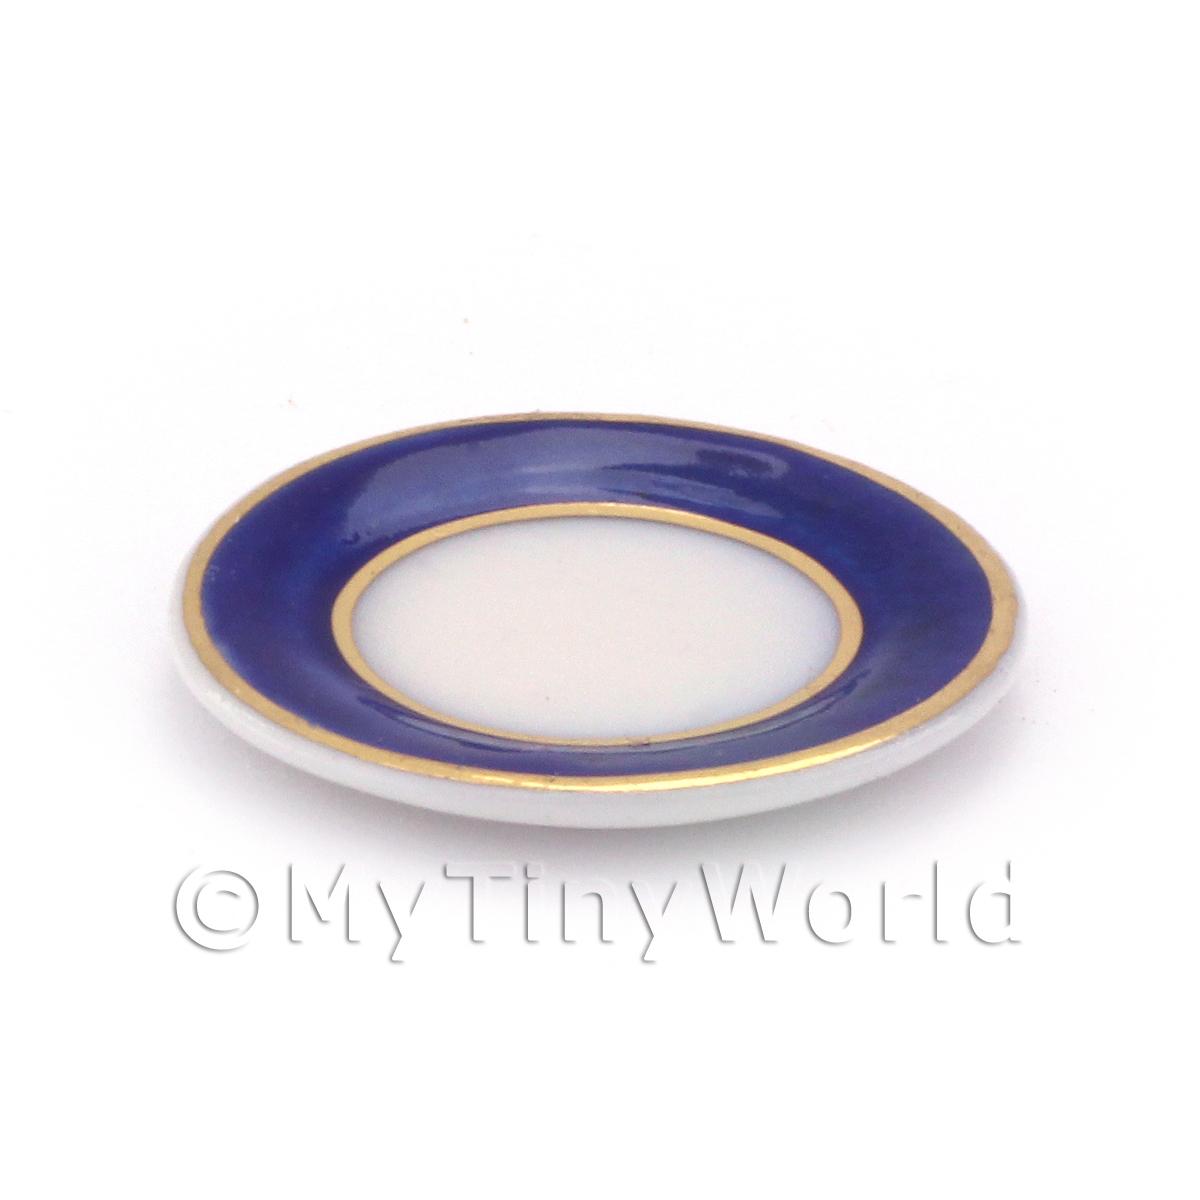 Dolls House Miniature Blue and Metallic Gold 26mm Oval Plate 